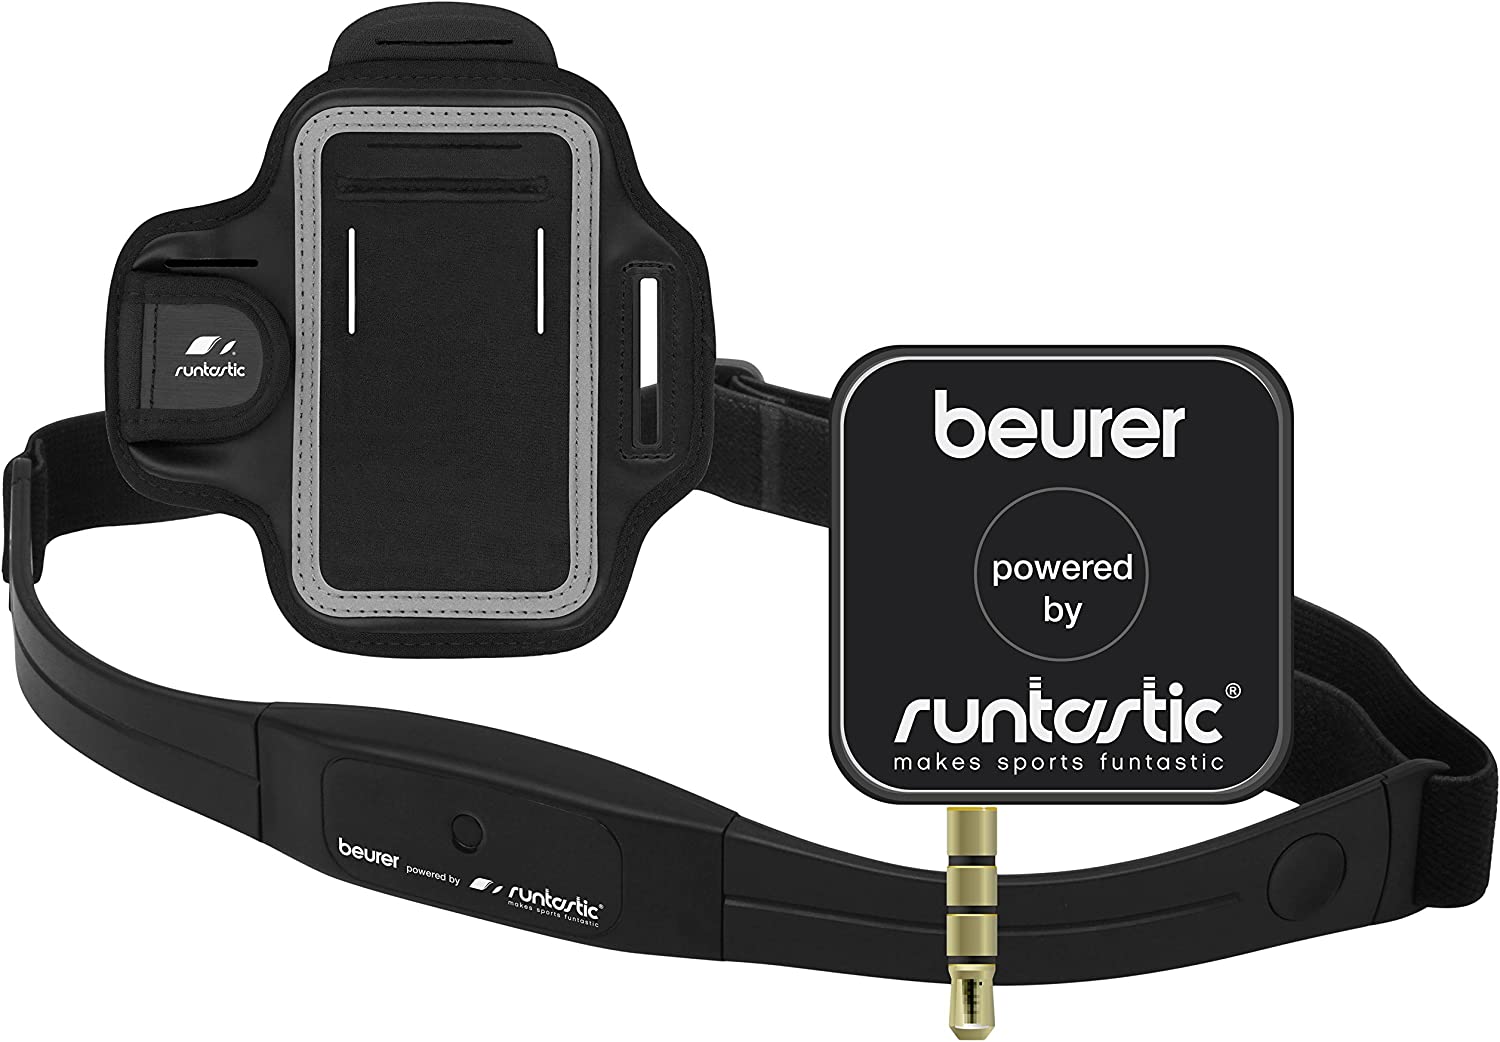 Beurer Runtastic PM200 Plus Heart Rate and GPS Runner\'s Kit for Smartphones - Black, 2.8 x 2.8 x 1.0 cm